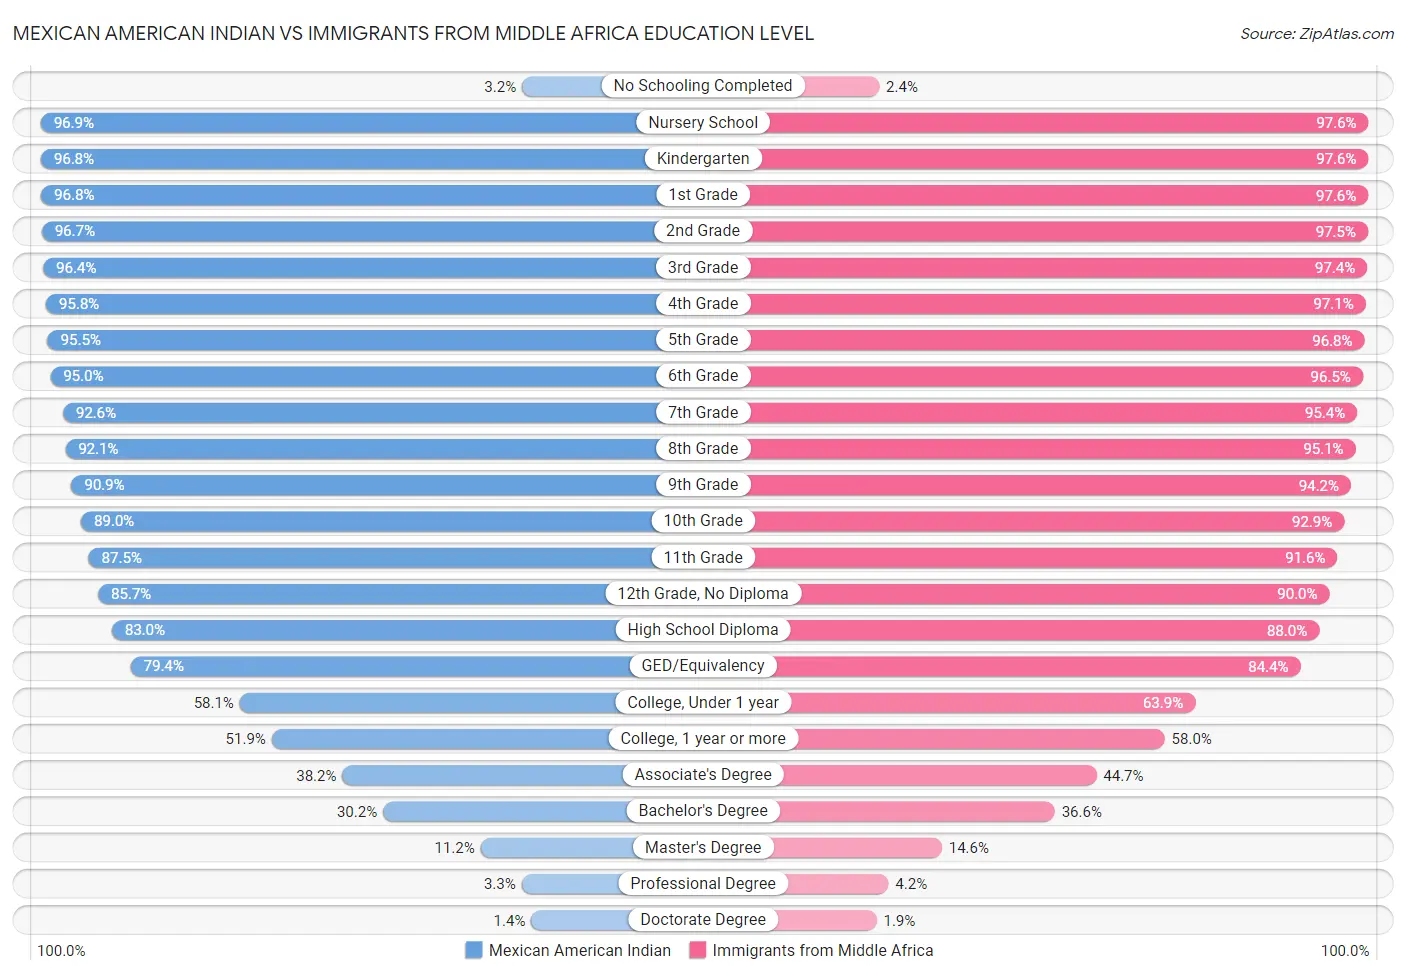 Mexican American Indian vs Immigrants from Middle Africa Education Level